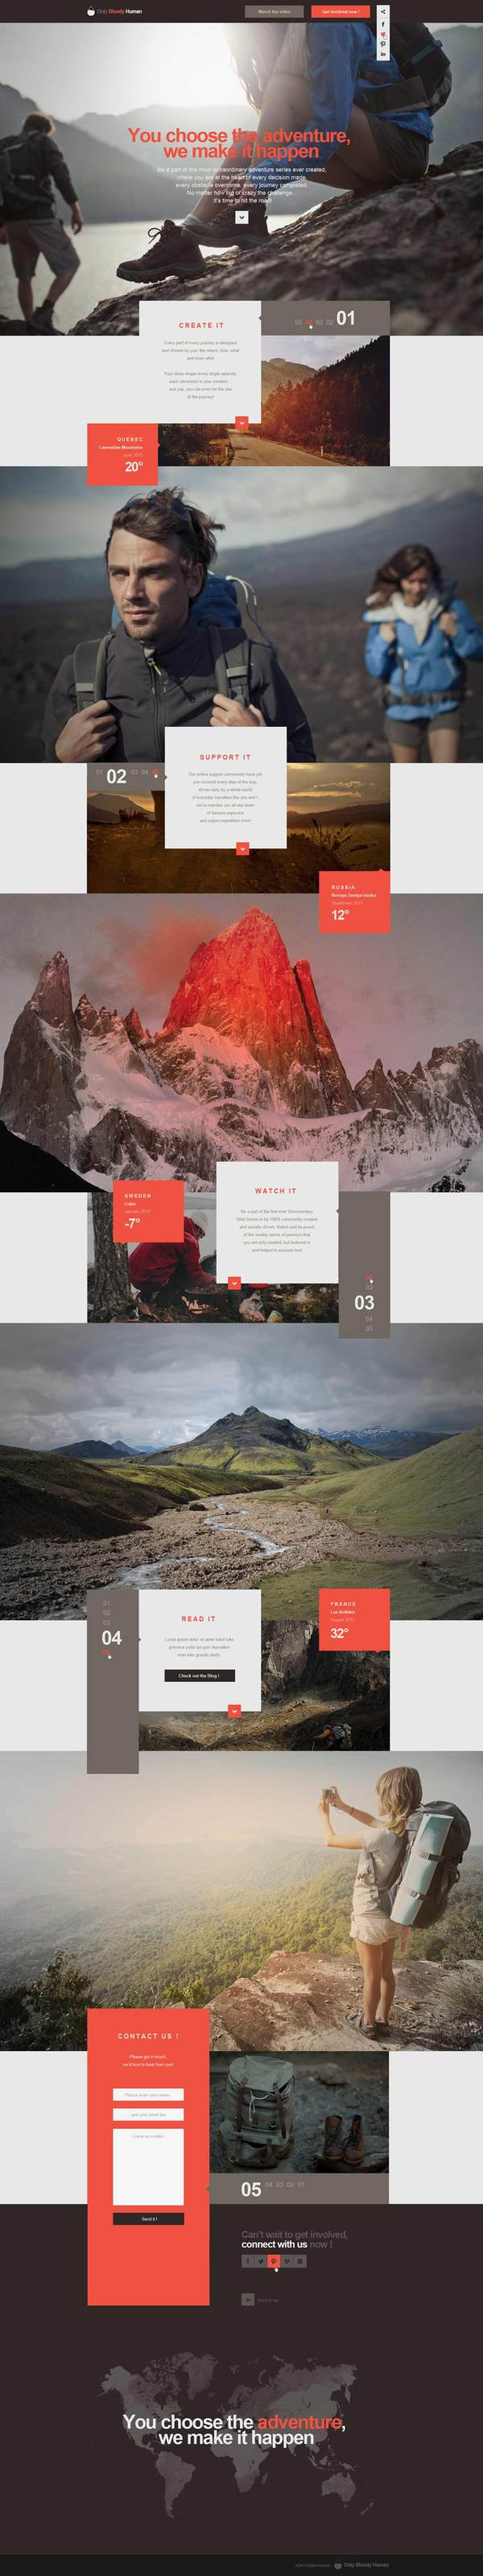 15-websites-with-full-page-designs-9